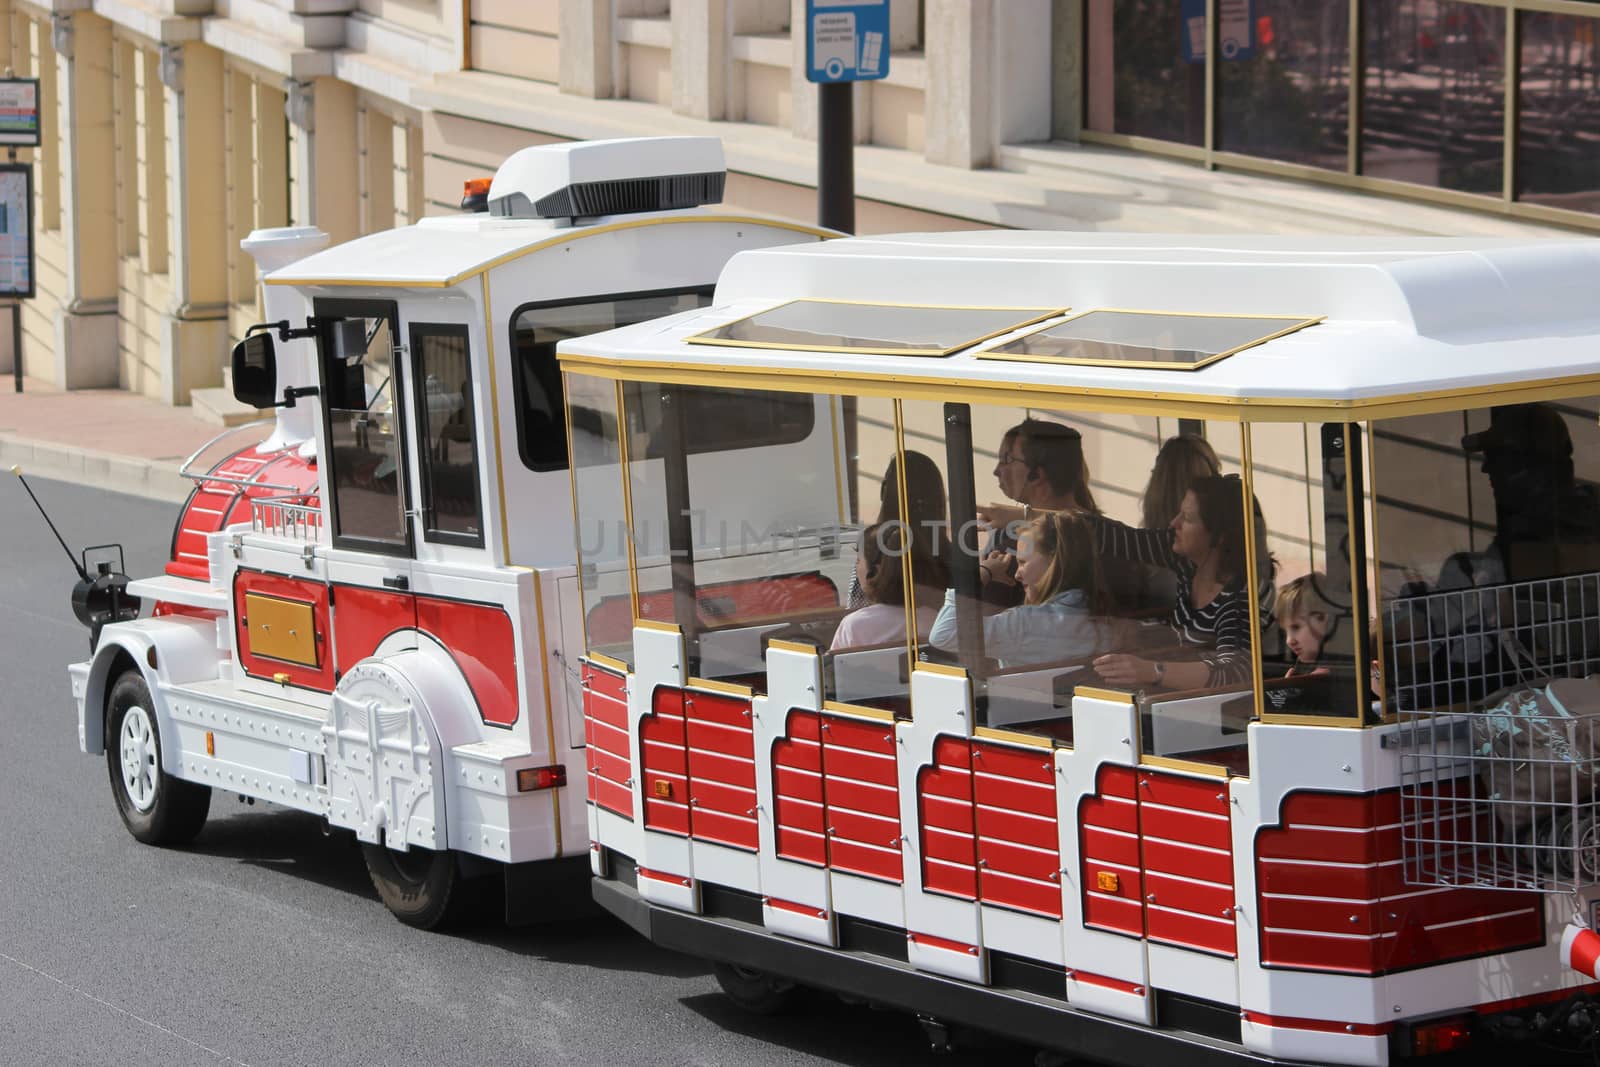 Monte-Carlo, Monaco - April 6, 2016: Red and White Trackless Train for Sightseeing in Monaco on the Street of Monte-Carlo, Monaco in the south of France